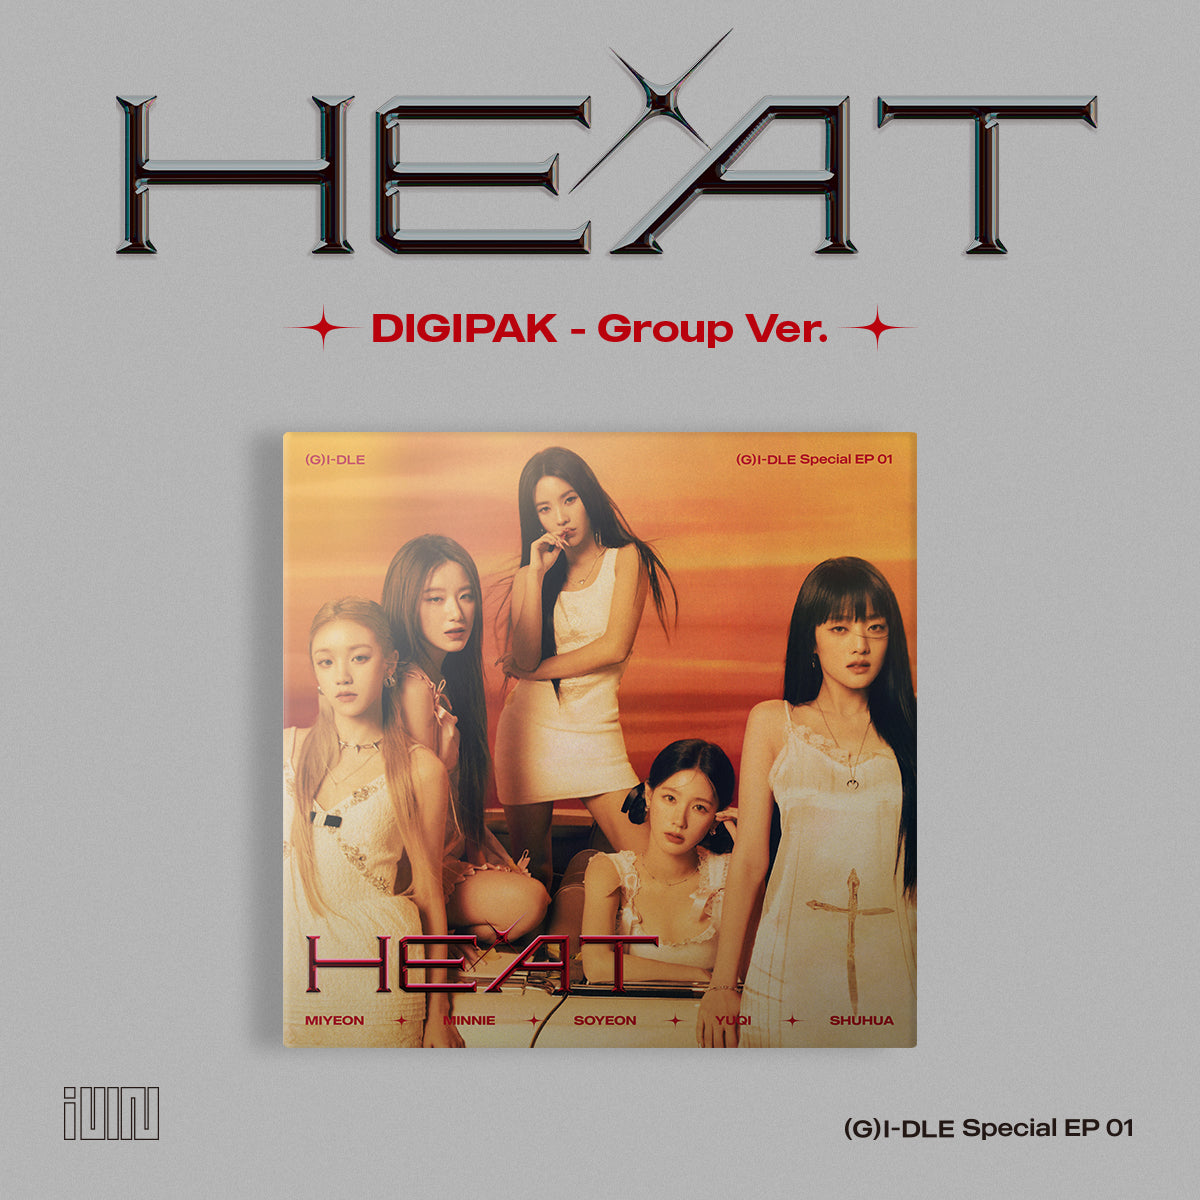 (G)I-DLE - Special EP 01 - HEAT (DIGIPAK - Group ver.)